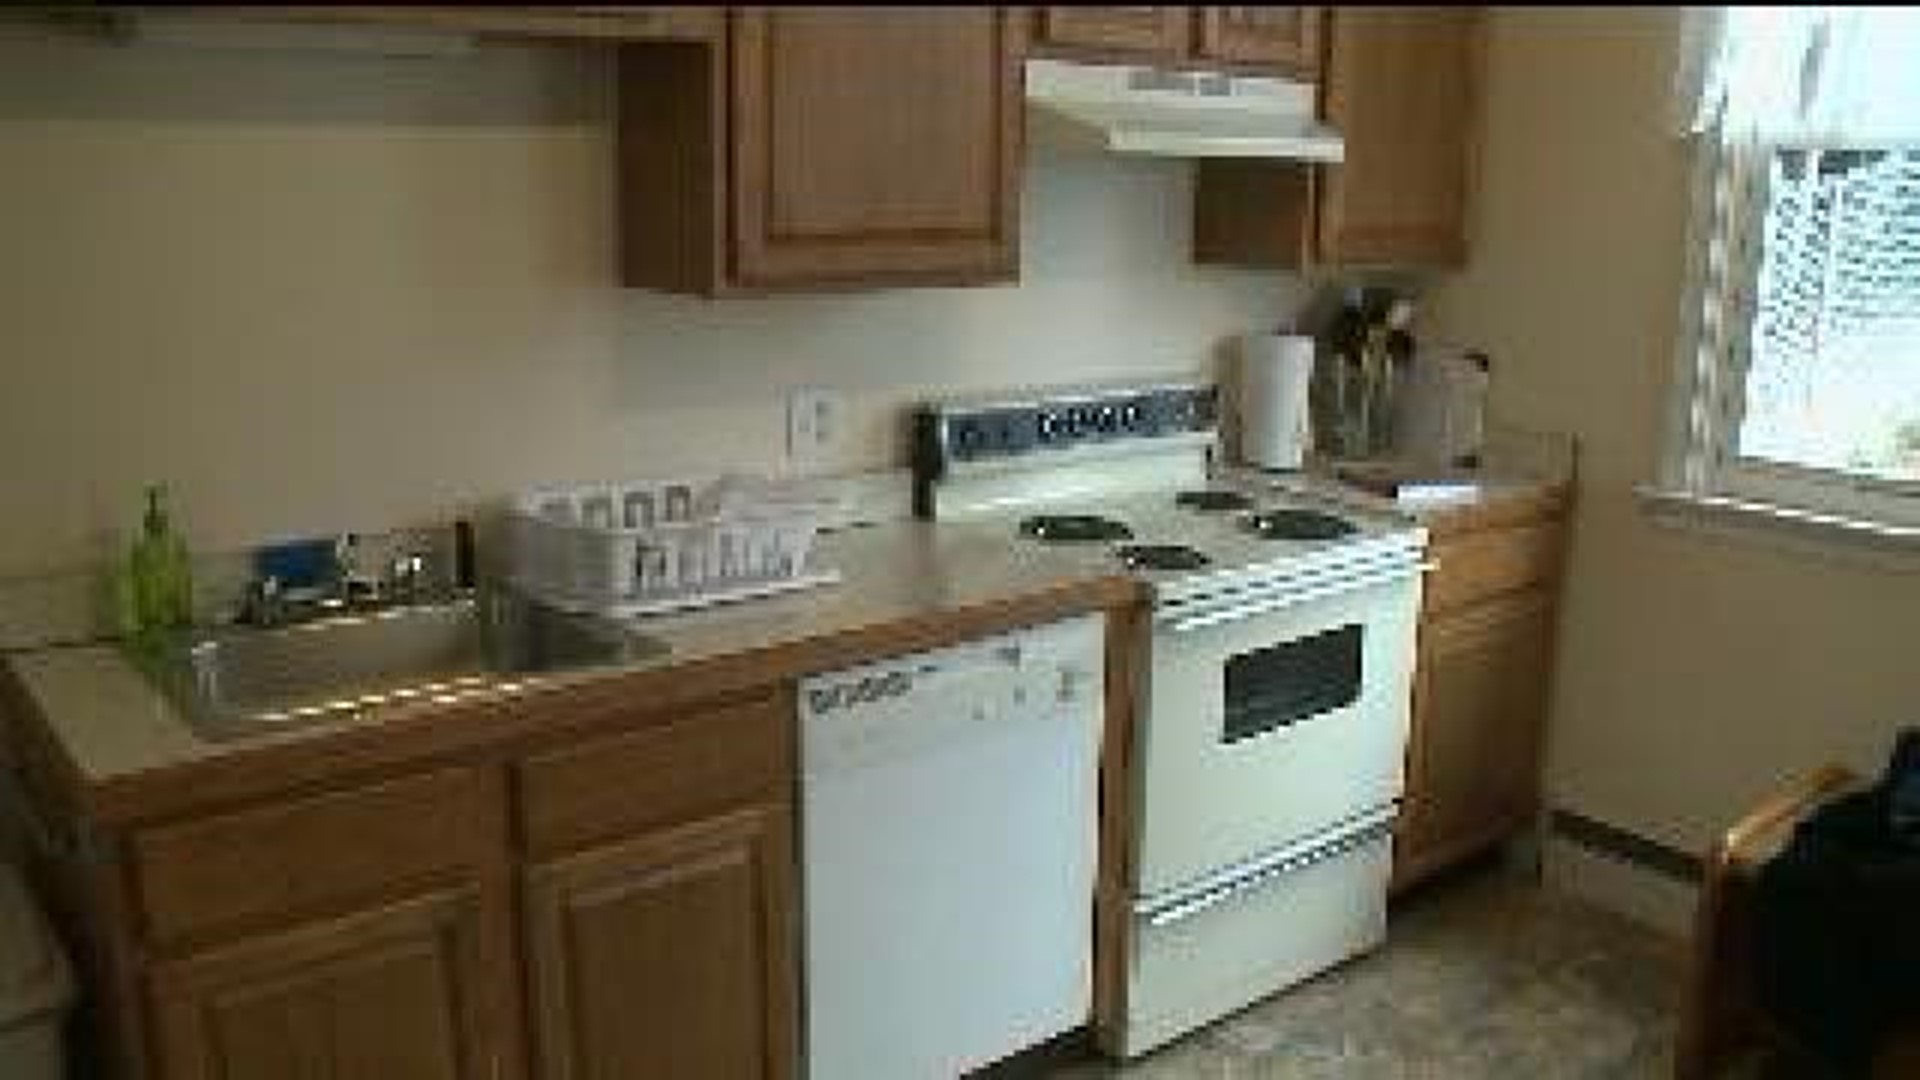 Group Home for Mothers Holds Open House